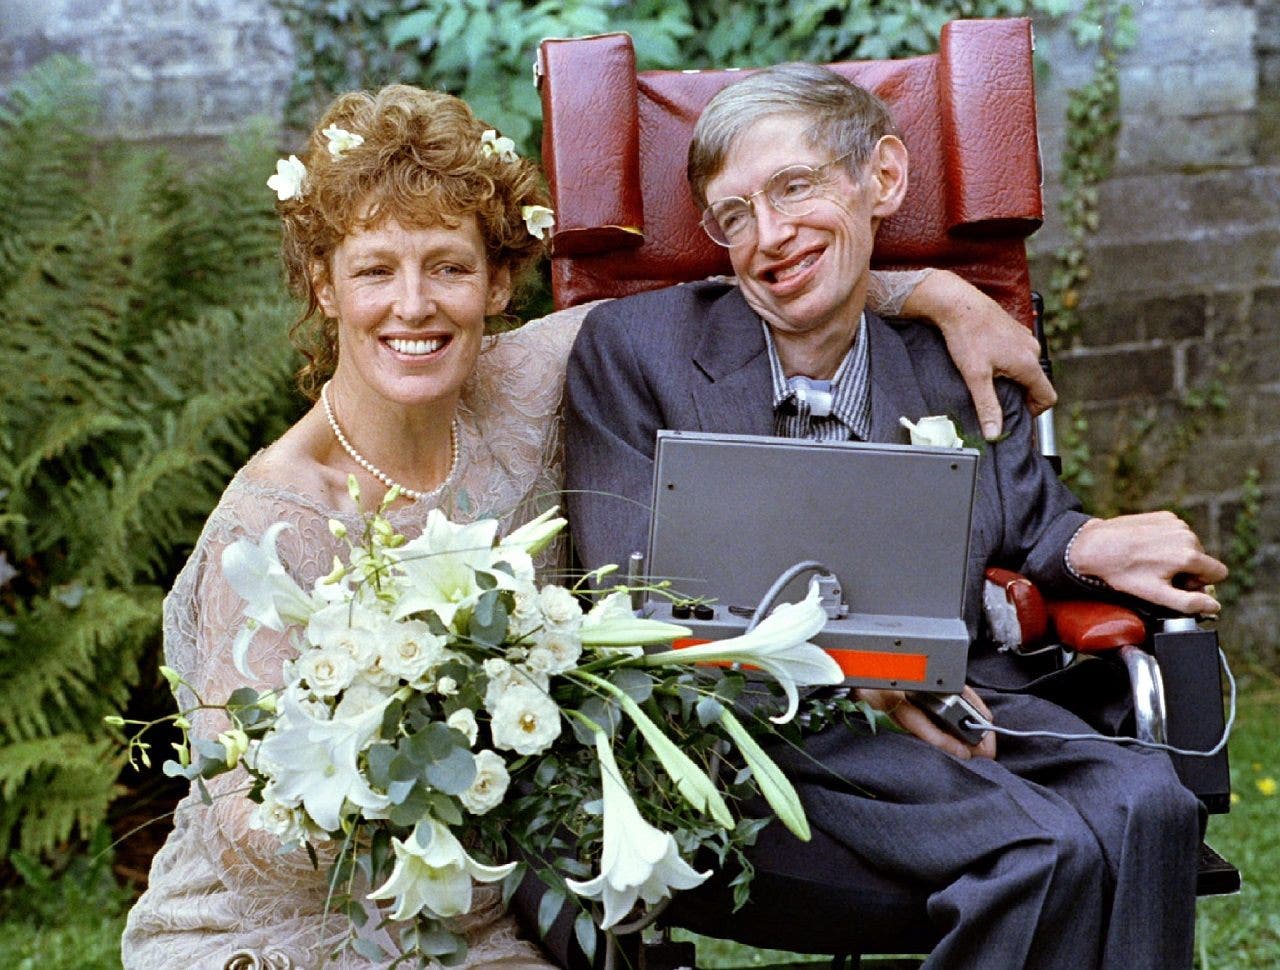 A look back on the life of renowned physicist Stephen Hawking